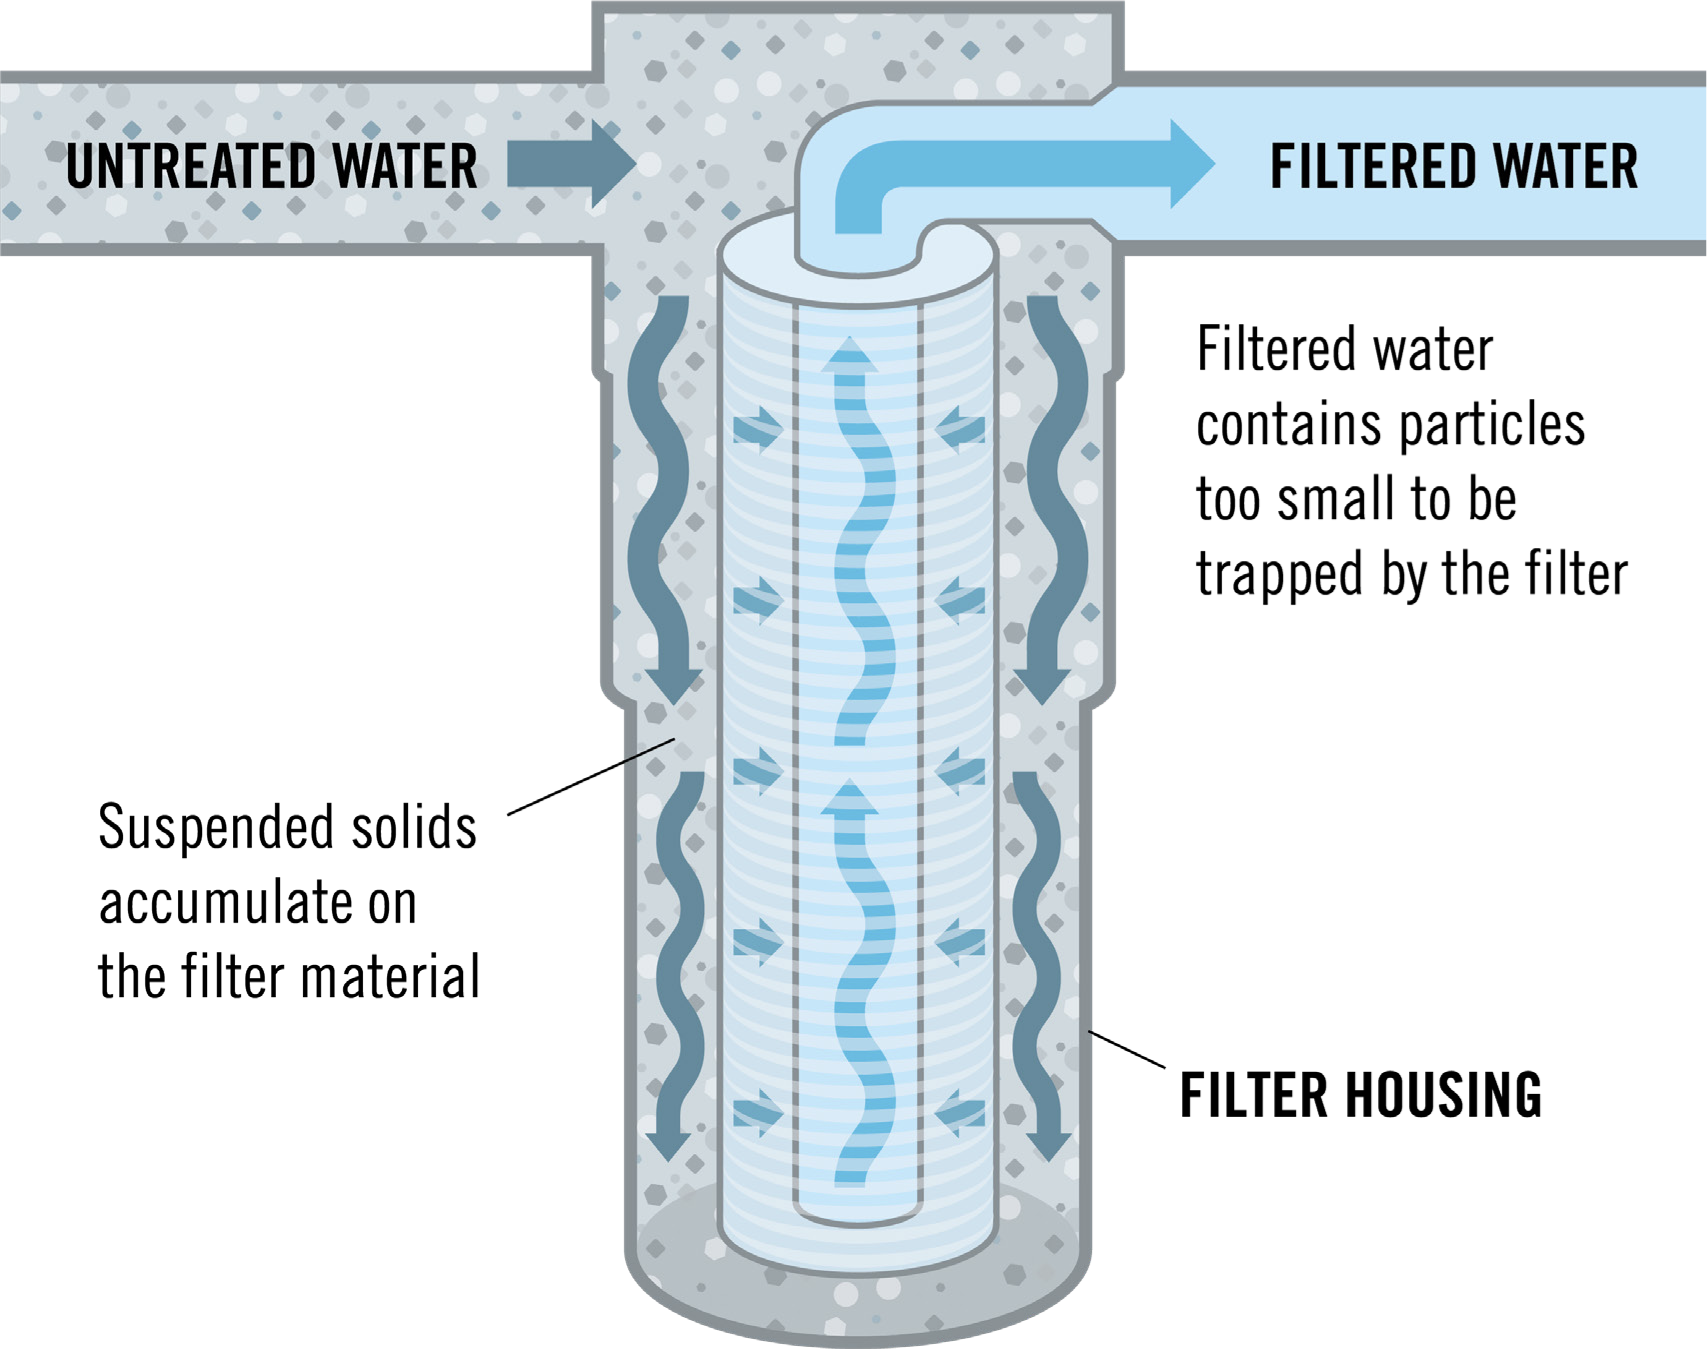 Disgram of the sediment filtration process. Untreated water enters the filter housing. Suspended solids accumulate on the filter material. Filtered water leaves the filter housing. Filtered water contains particles too small to be trapped by the filter